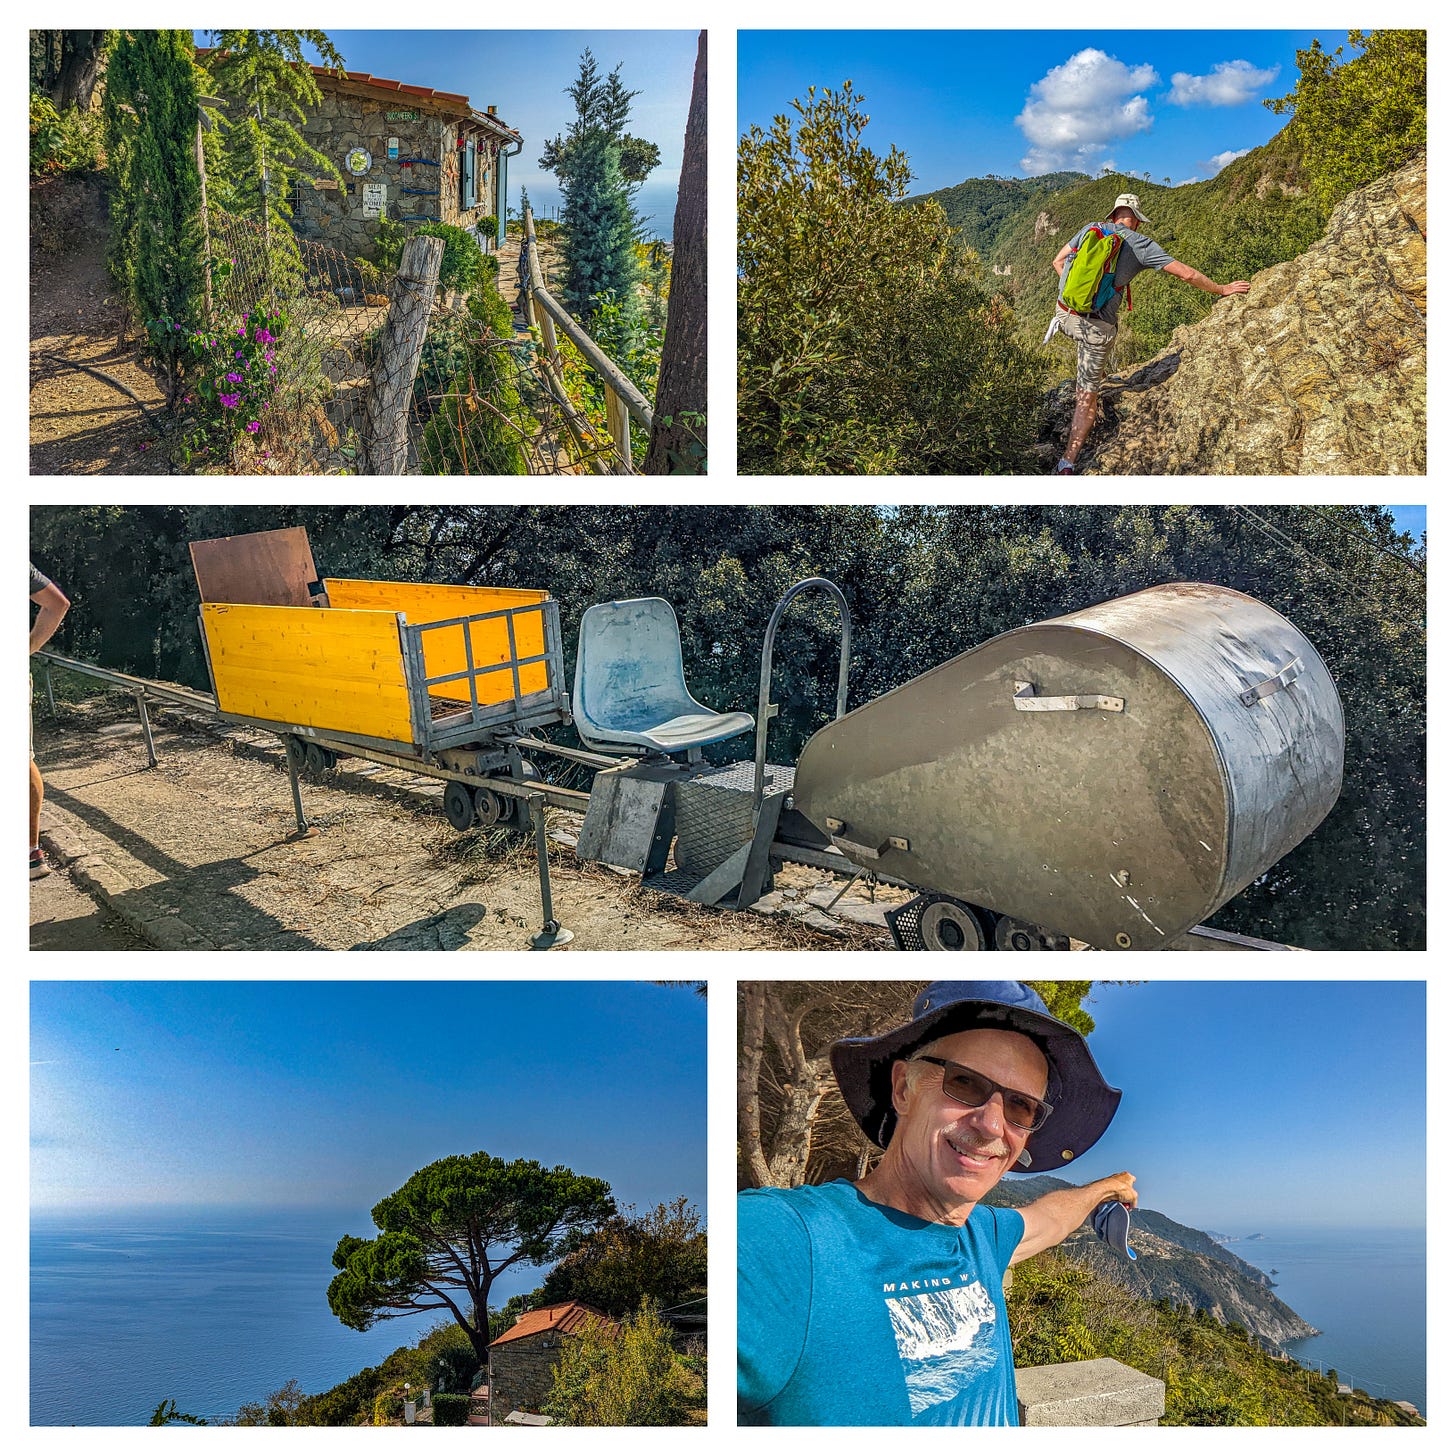 Photos showing the hike from Portovenere including a stone building, Brent walking along the trail, a carrier to haul grapes along the rails, a lone tree with the ocean behind it, and Michael pointing back toward Portovenere far behind them. 